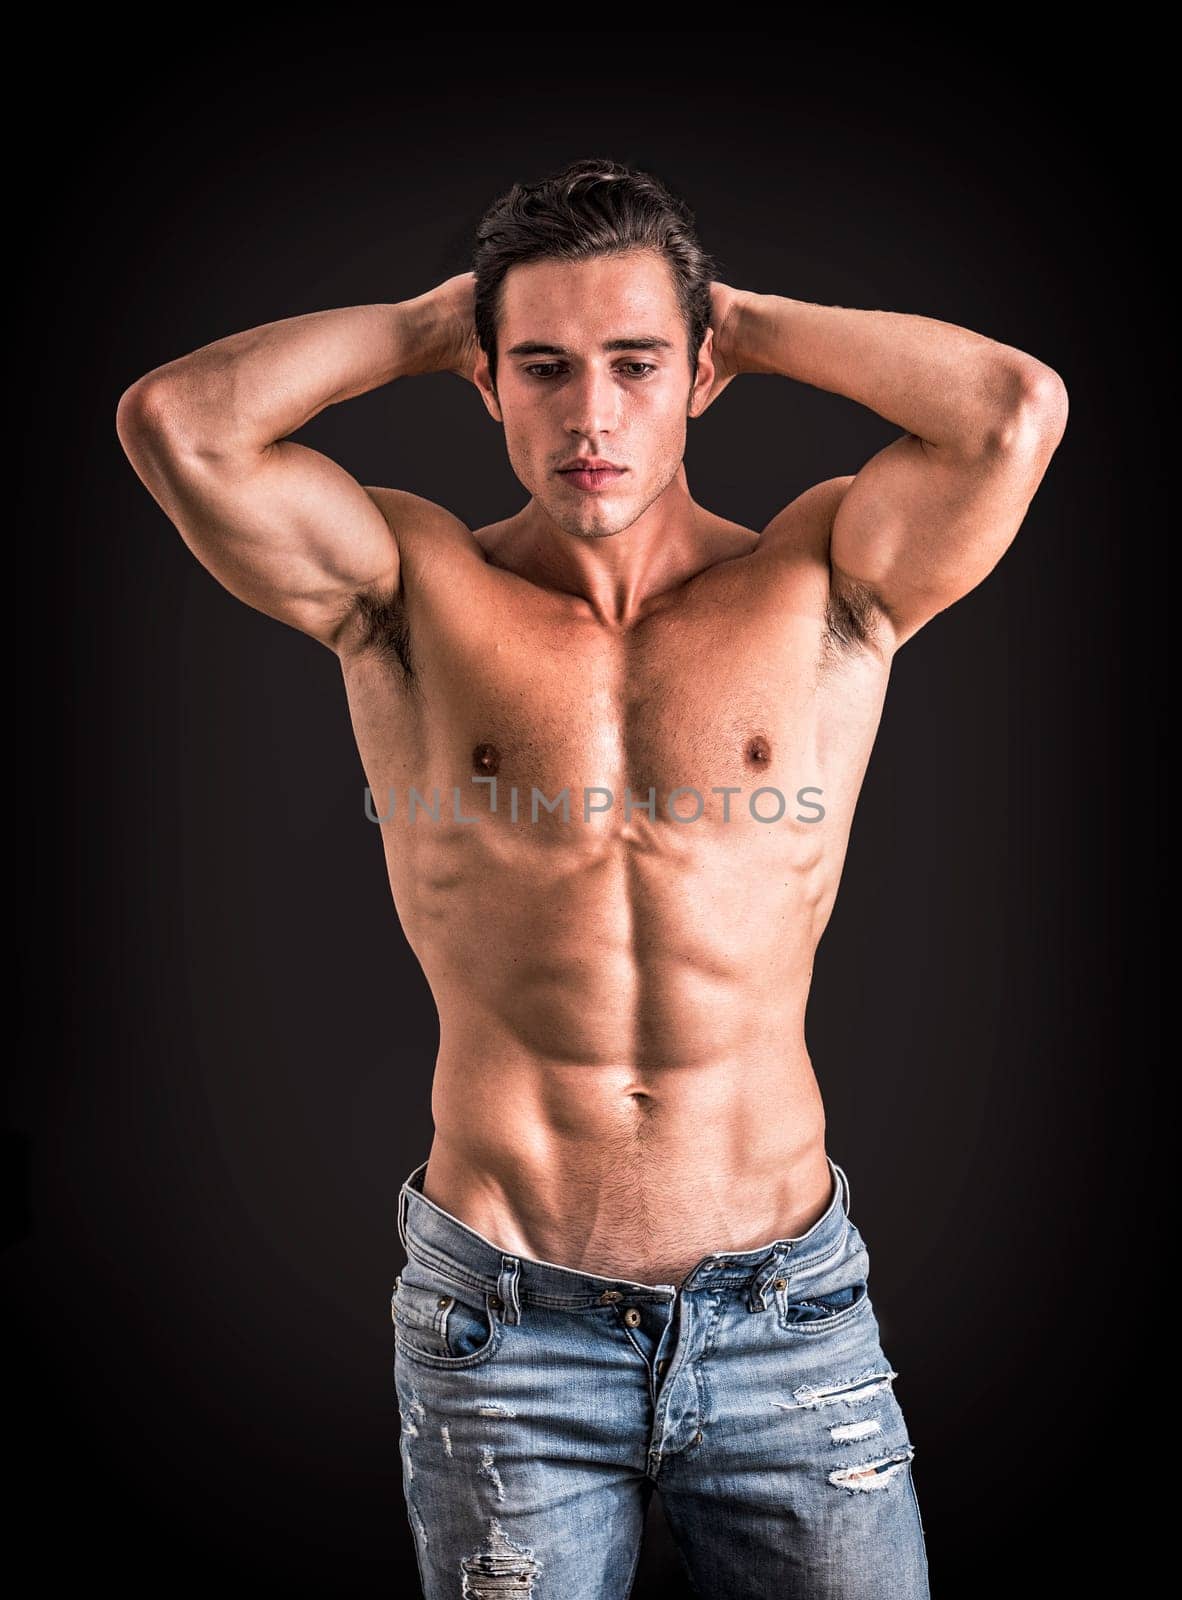 A shirtless man with hands on his head. Photo of a shirtless man with hands touching his hair